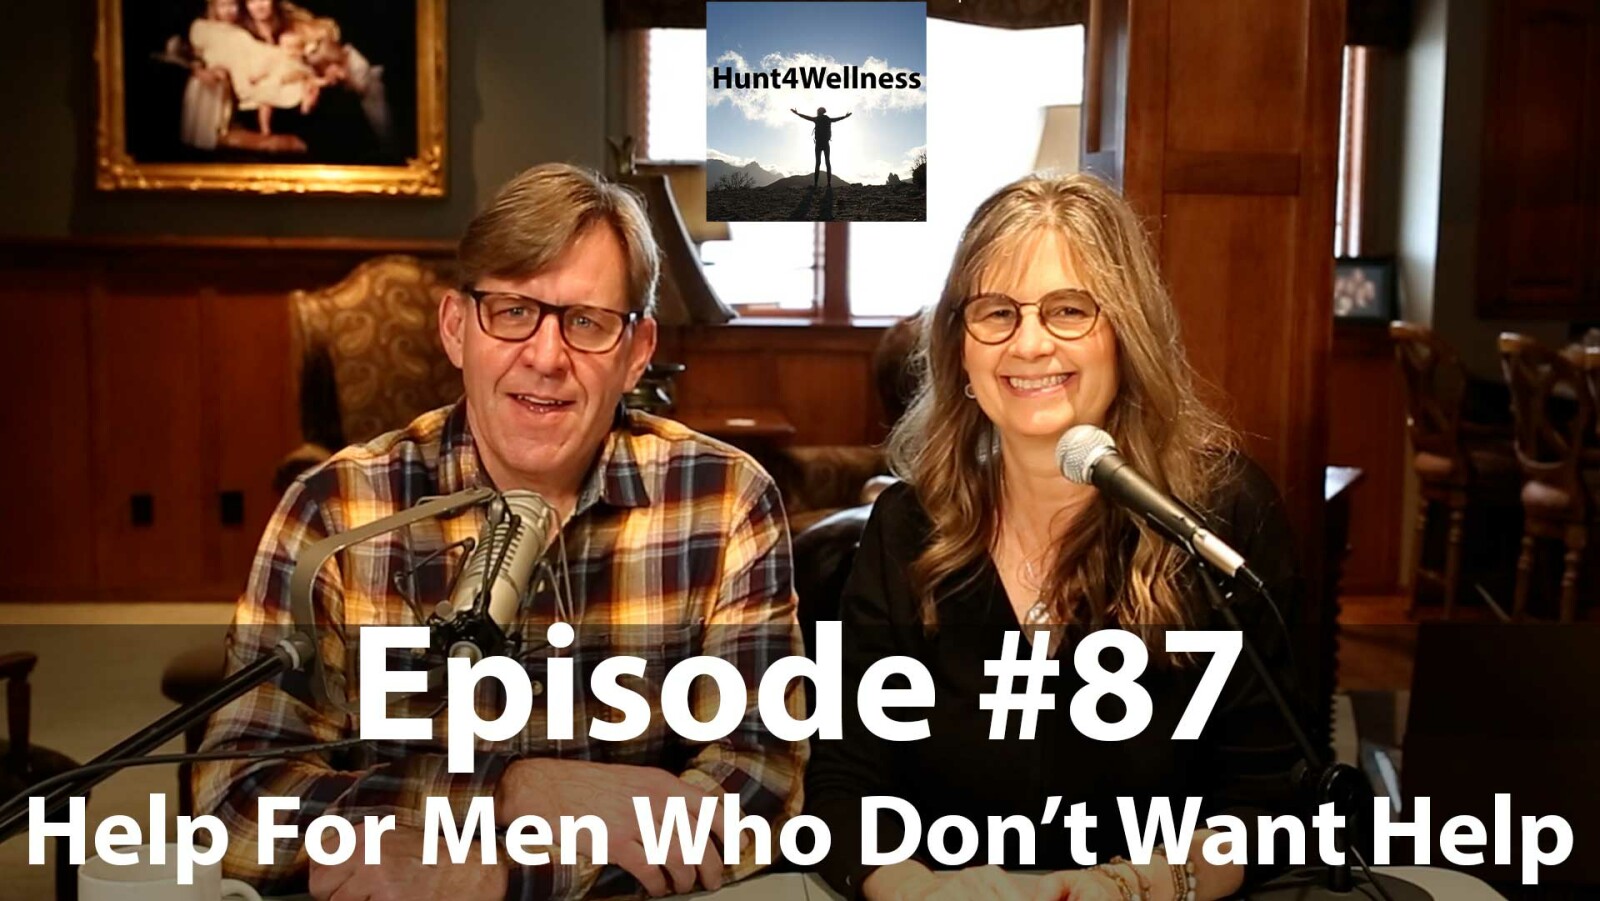 Episode #87 - Help For Men Who Don't Want Help